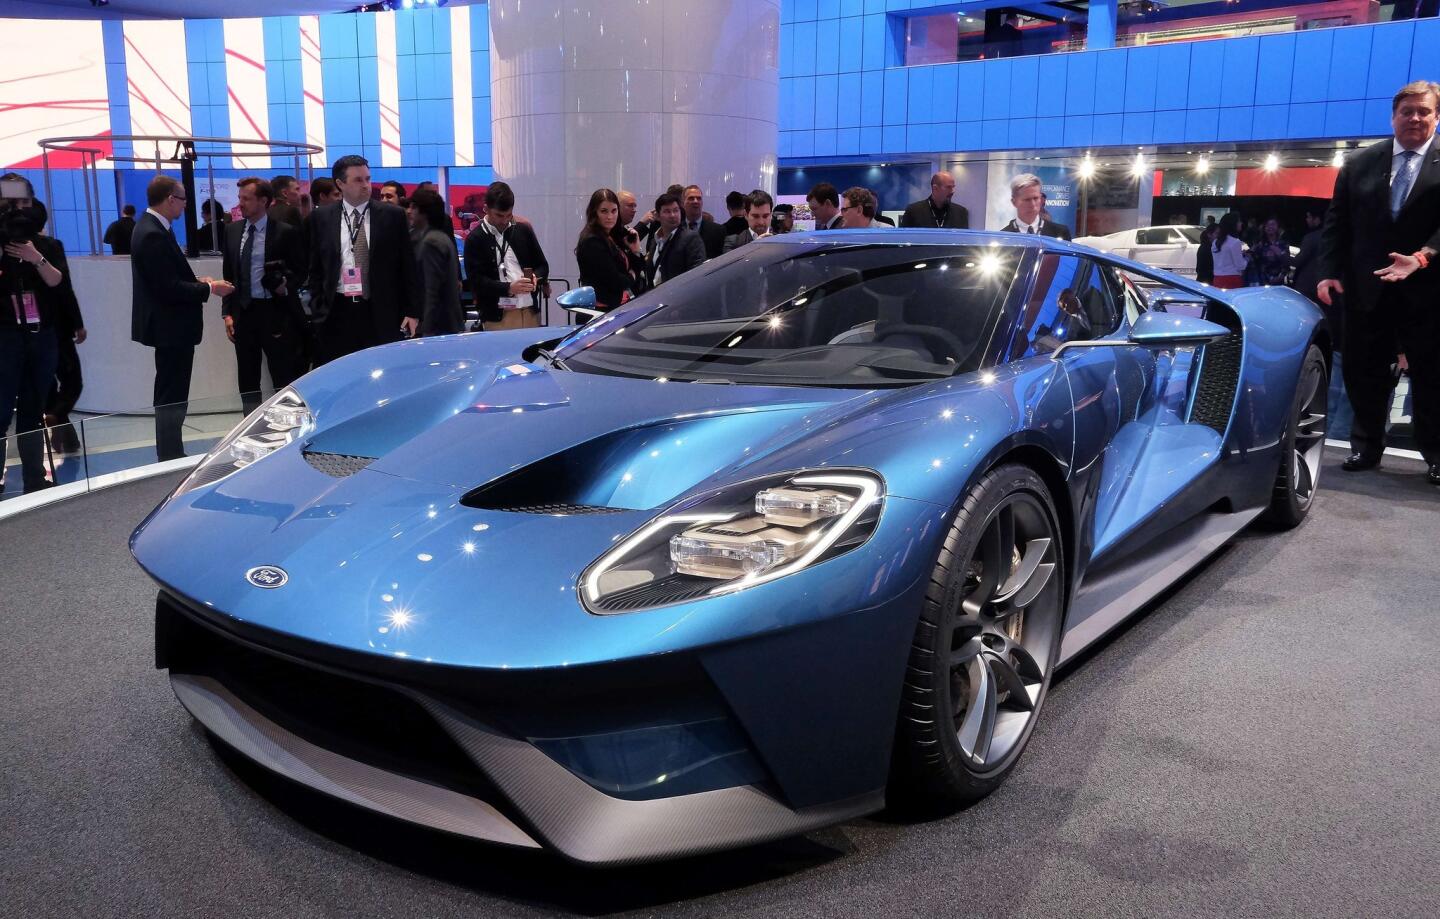 The new Ford GT is pictured at the Detroit Auto Show. Headed to production in 2016, the features a carbon fiber passenger cell and body panels, and a 3.5-liter twin-turbocharged V-6 engine that makes more than 600 horsepower.